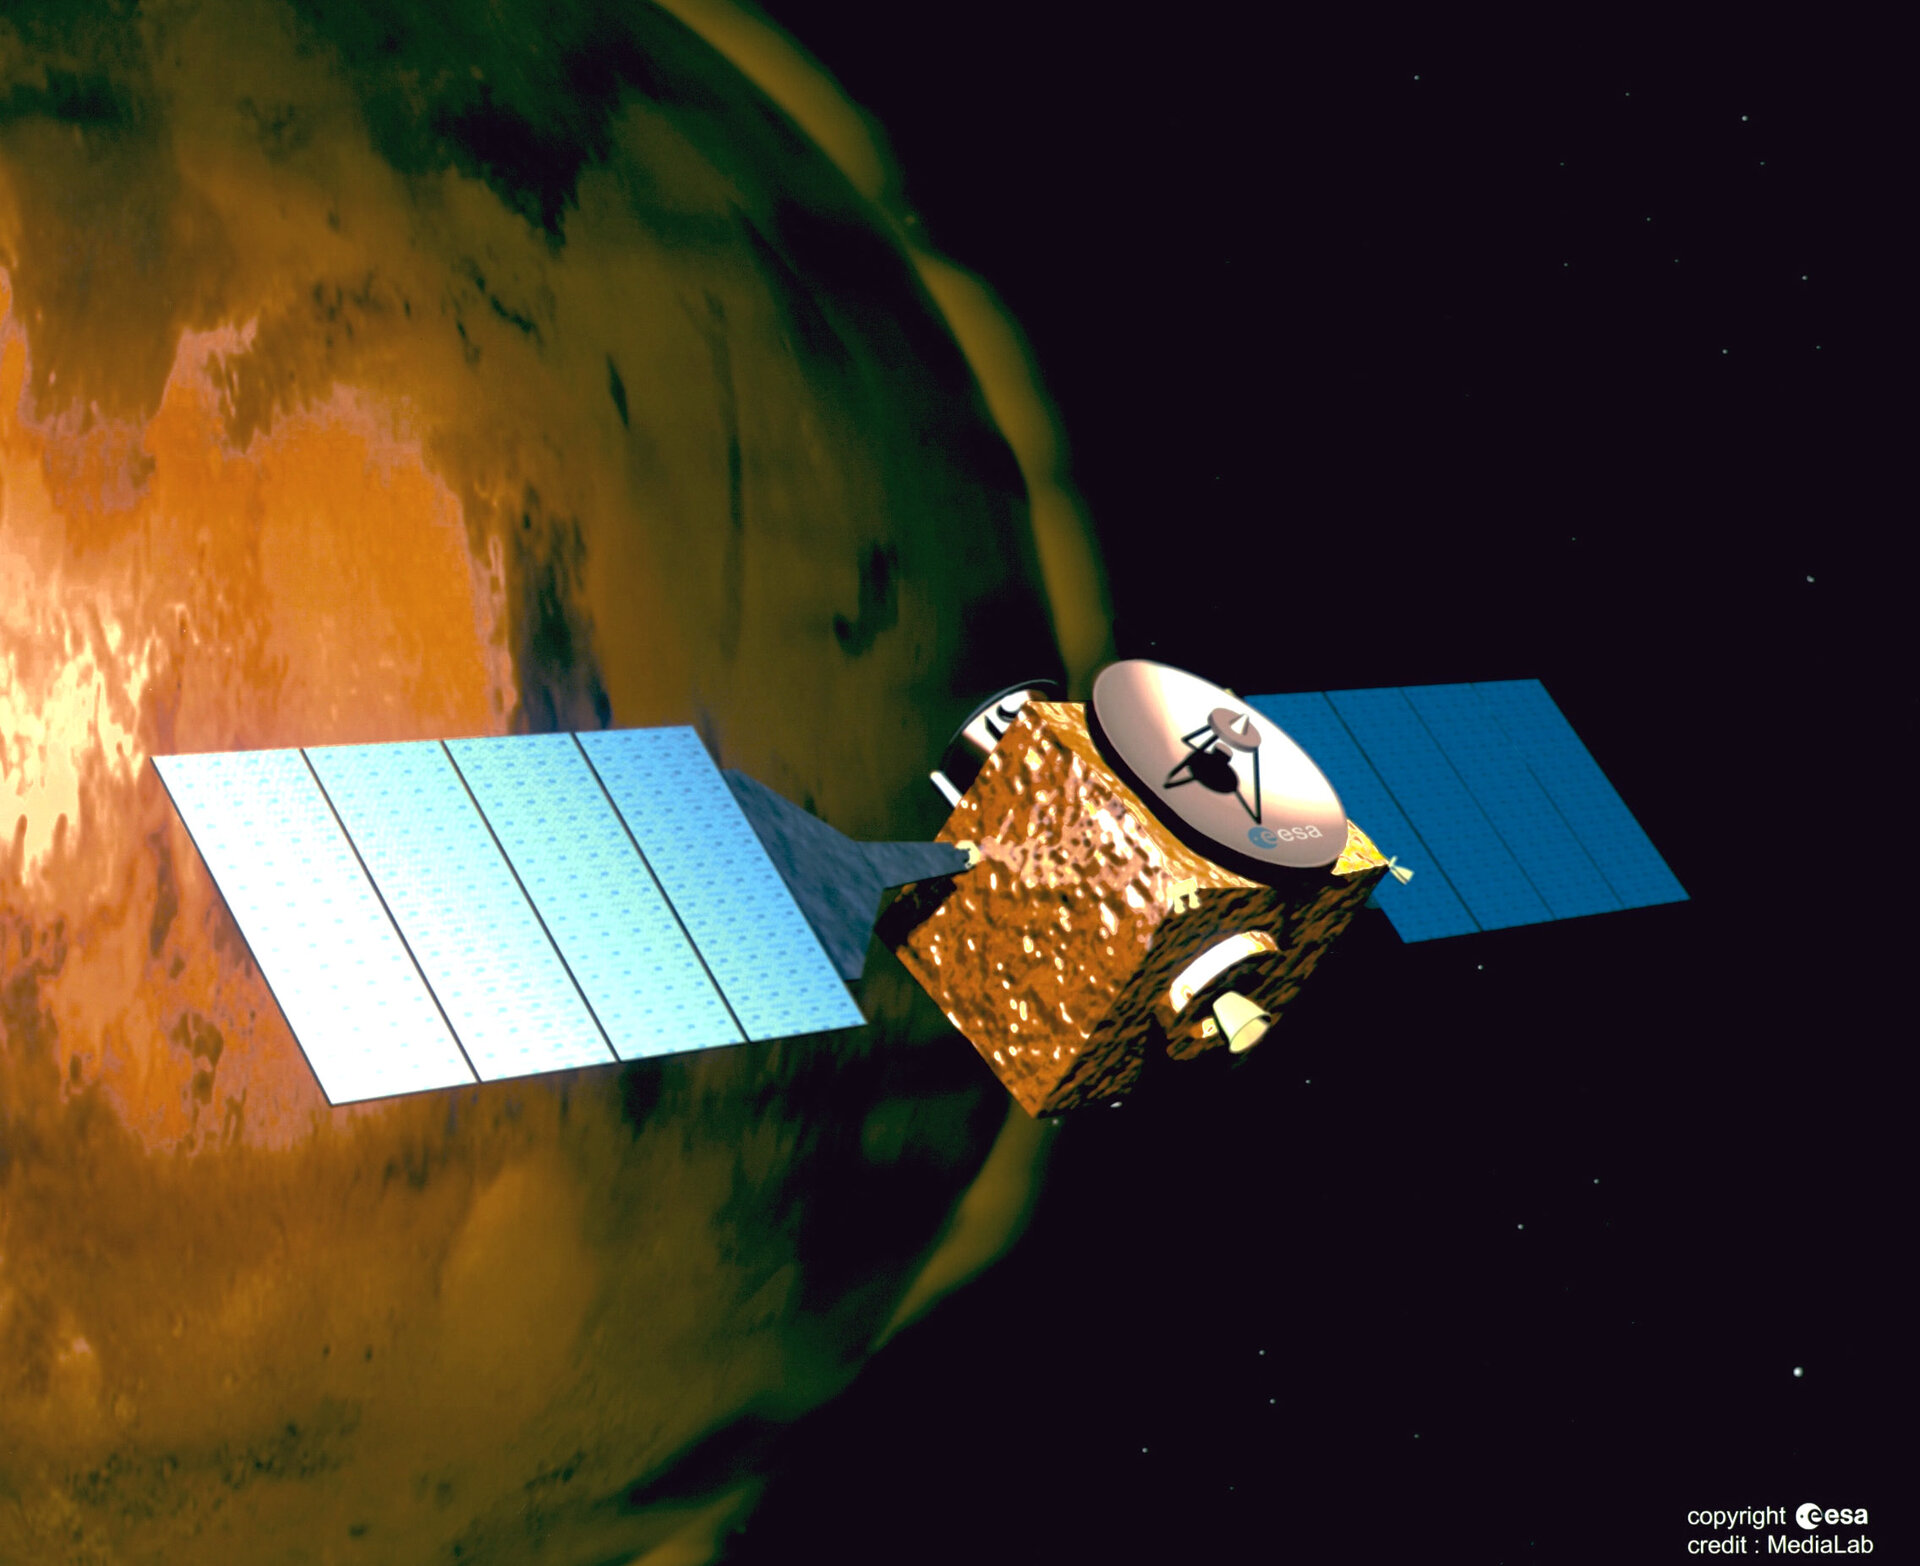 ESA - Mars Express orbiting precisely and safely